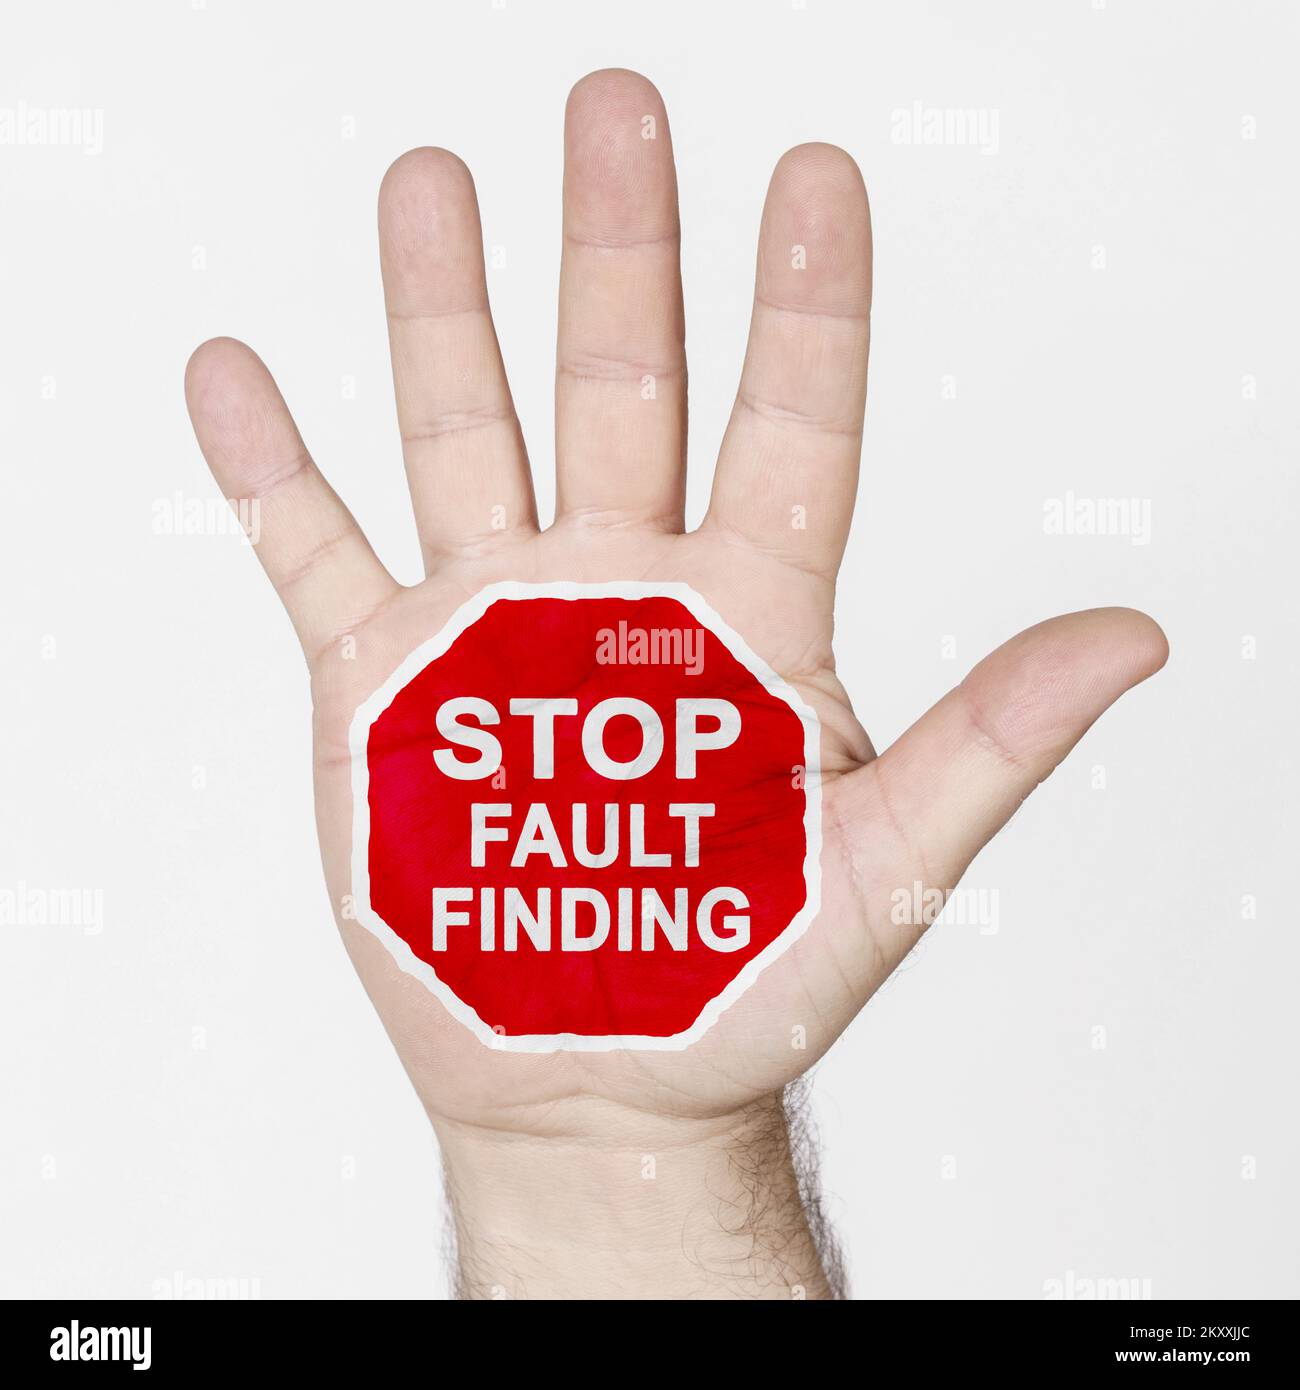 On the palm of the hand there is a stop sign with the inscription - STOP FAULT FINDING. Isolated on white background. Stock Photo